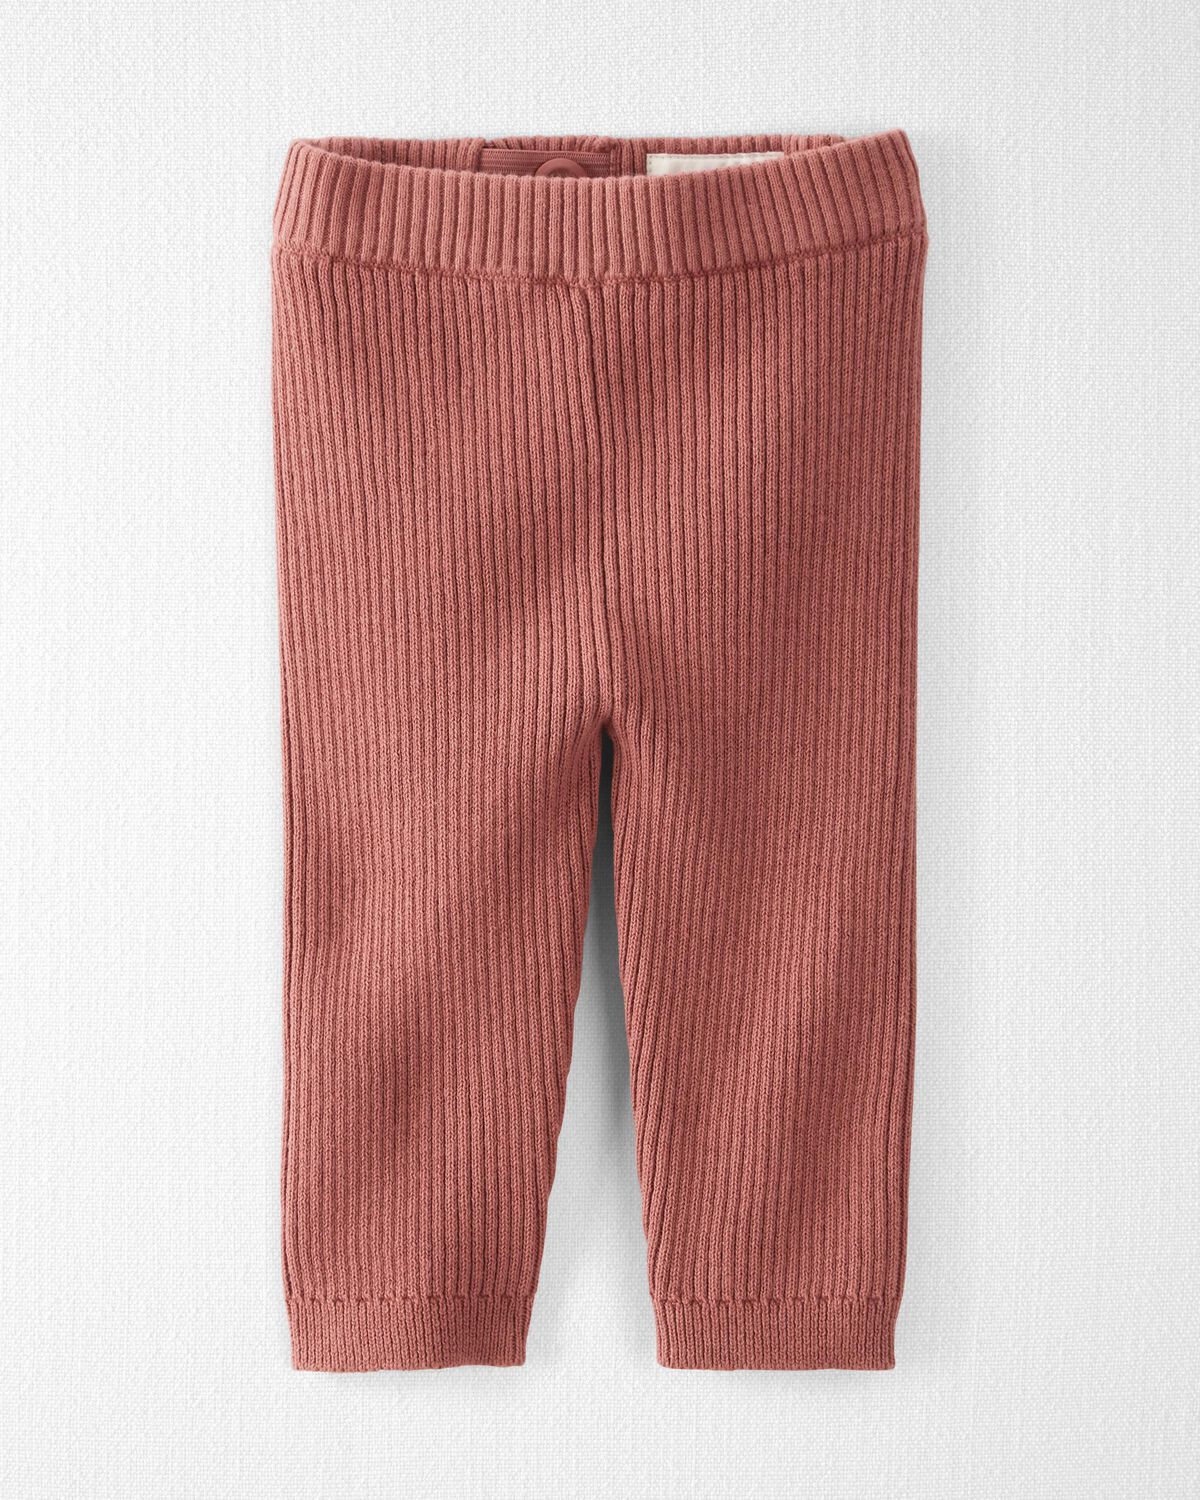 Rose Baby Organic Cotton Ribbed Sweater Knit Pants in Rose
 | carters.com | Carter's